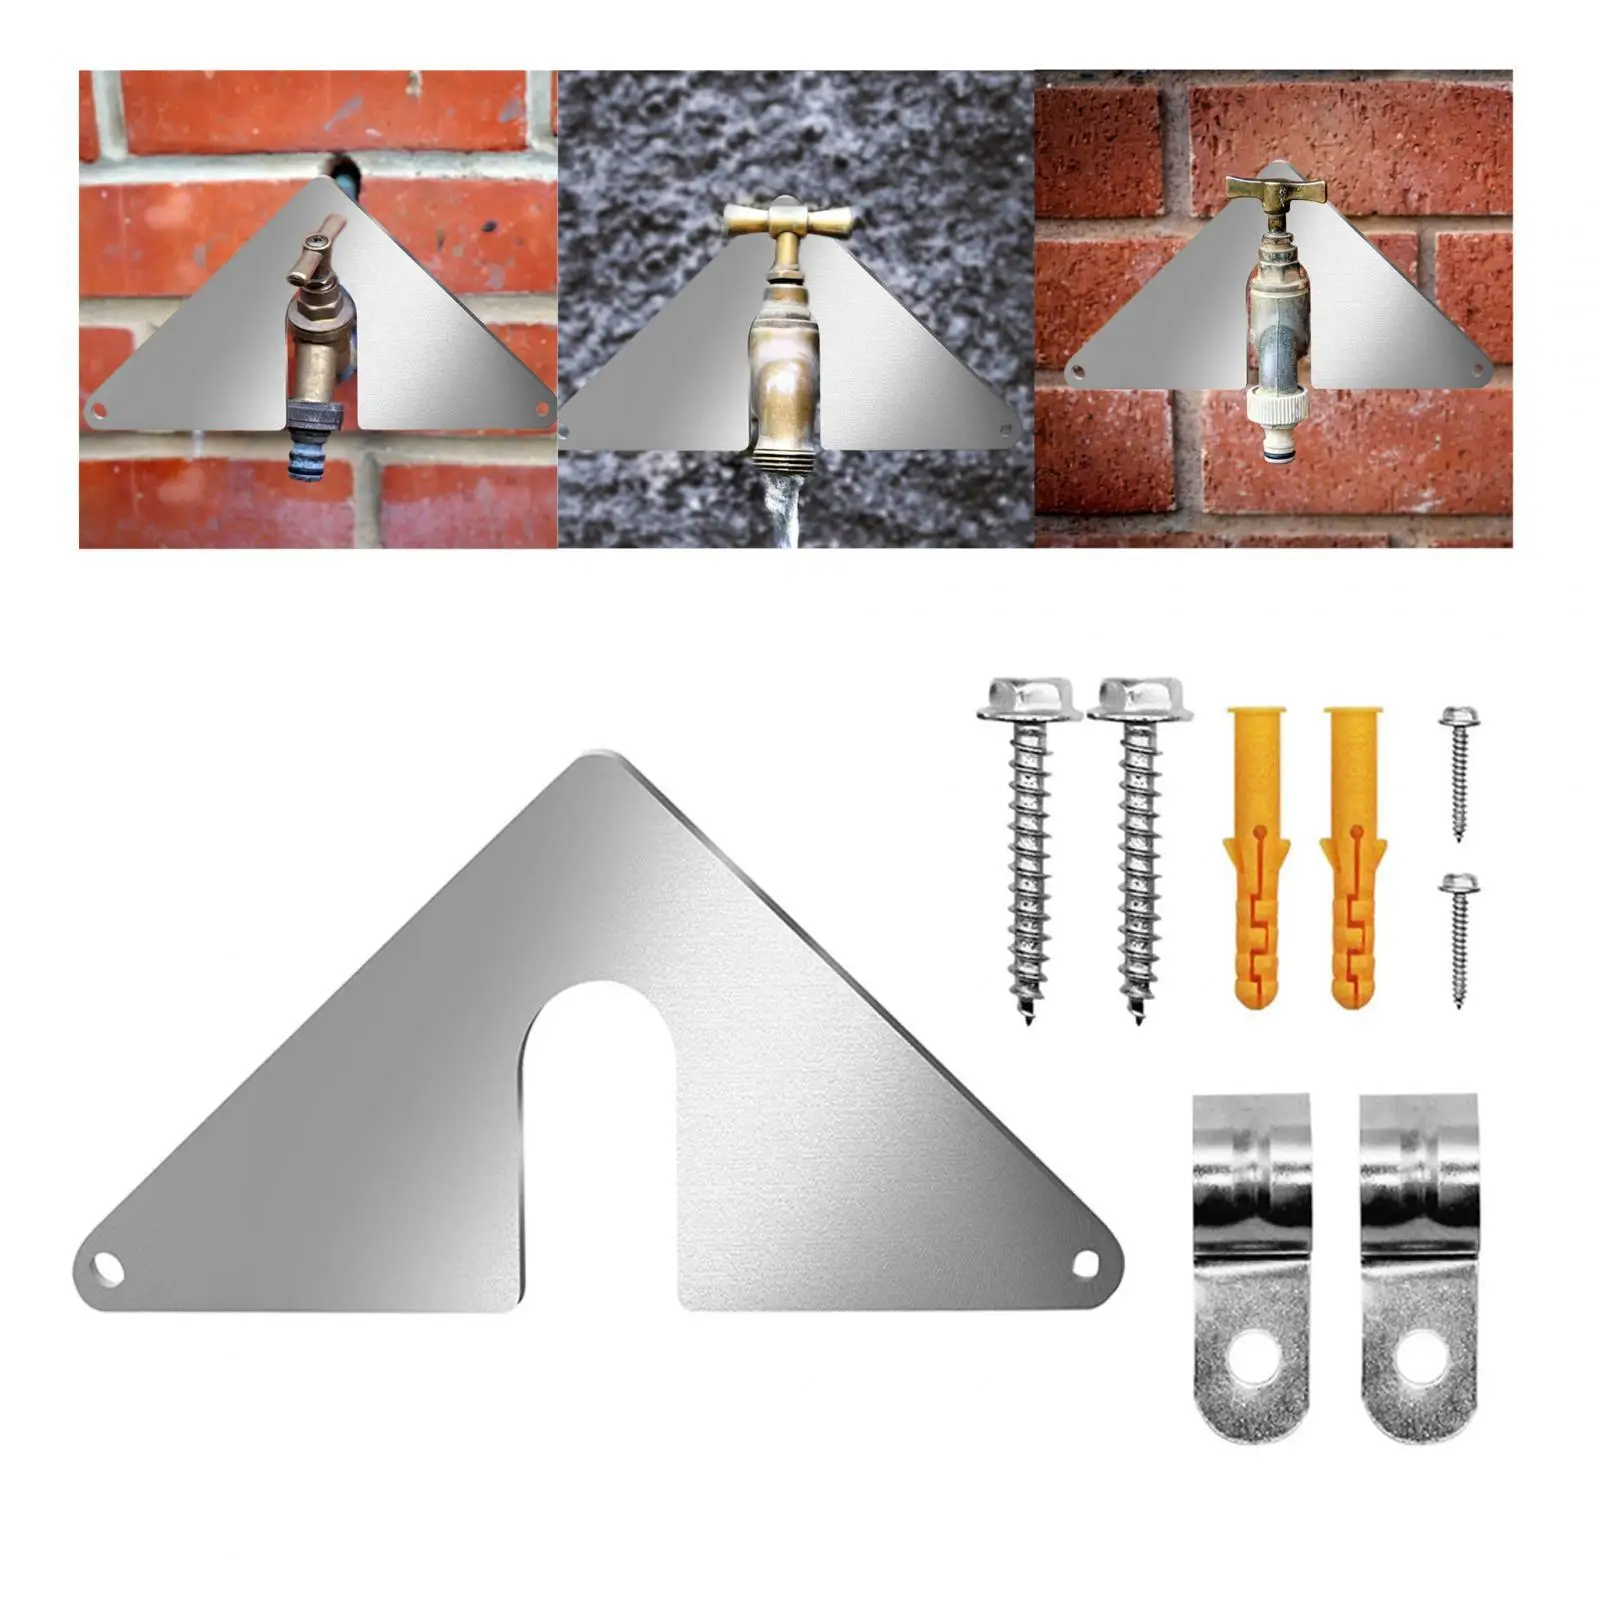 Hose Bib Mounting Plate for Spigot No Plumbing Accessories Fix Loose Sillcock Triangle Faucet Mounting Plate for Outside Brick